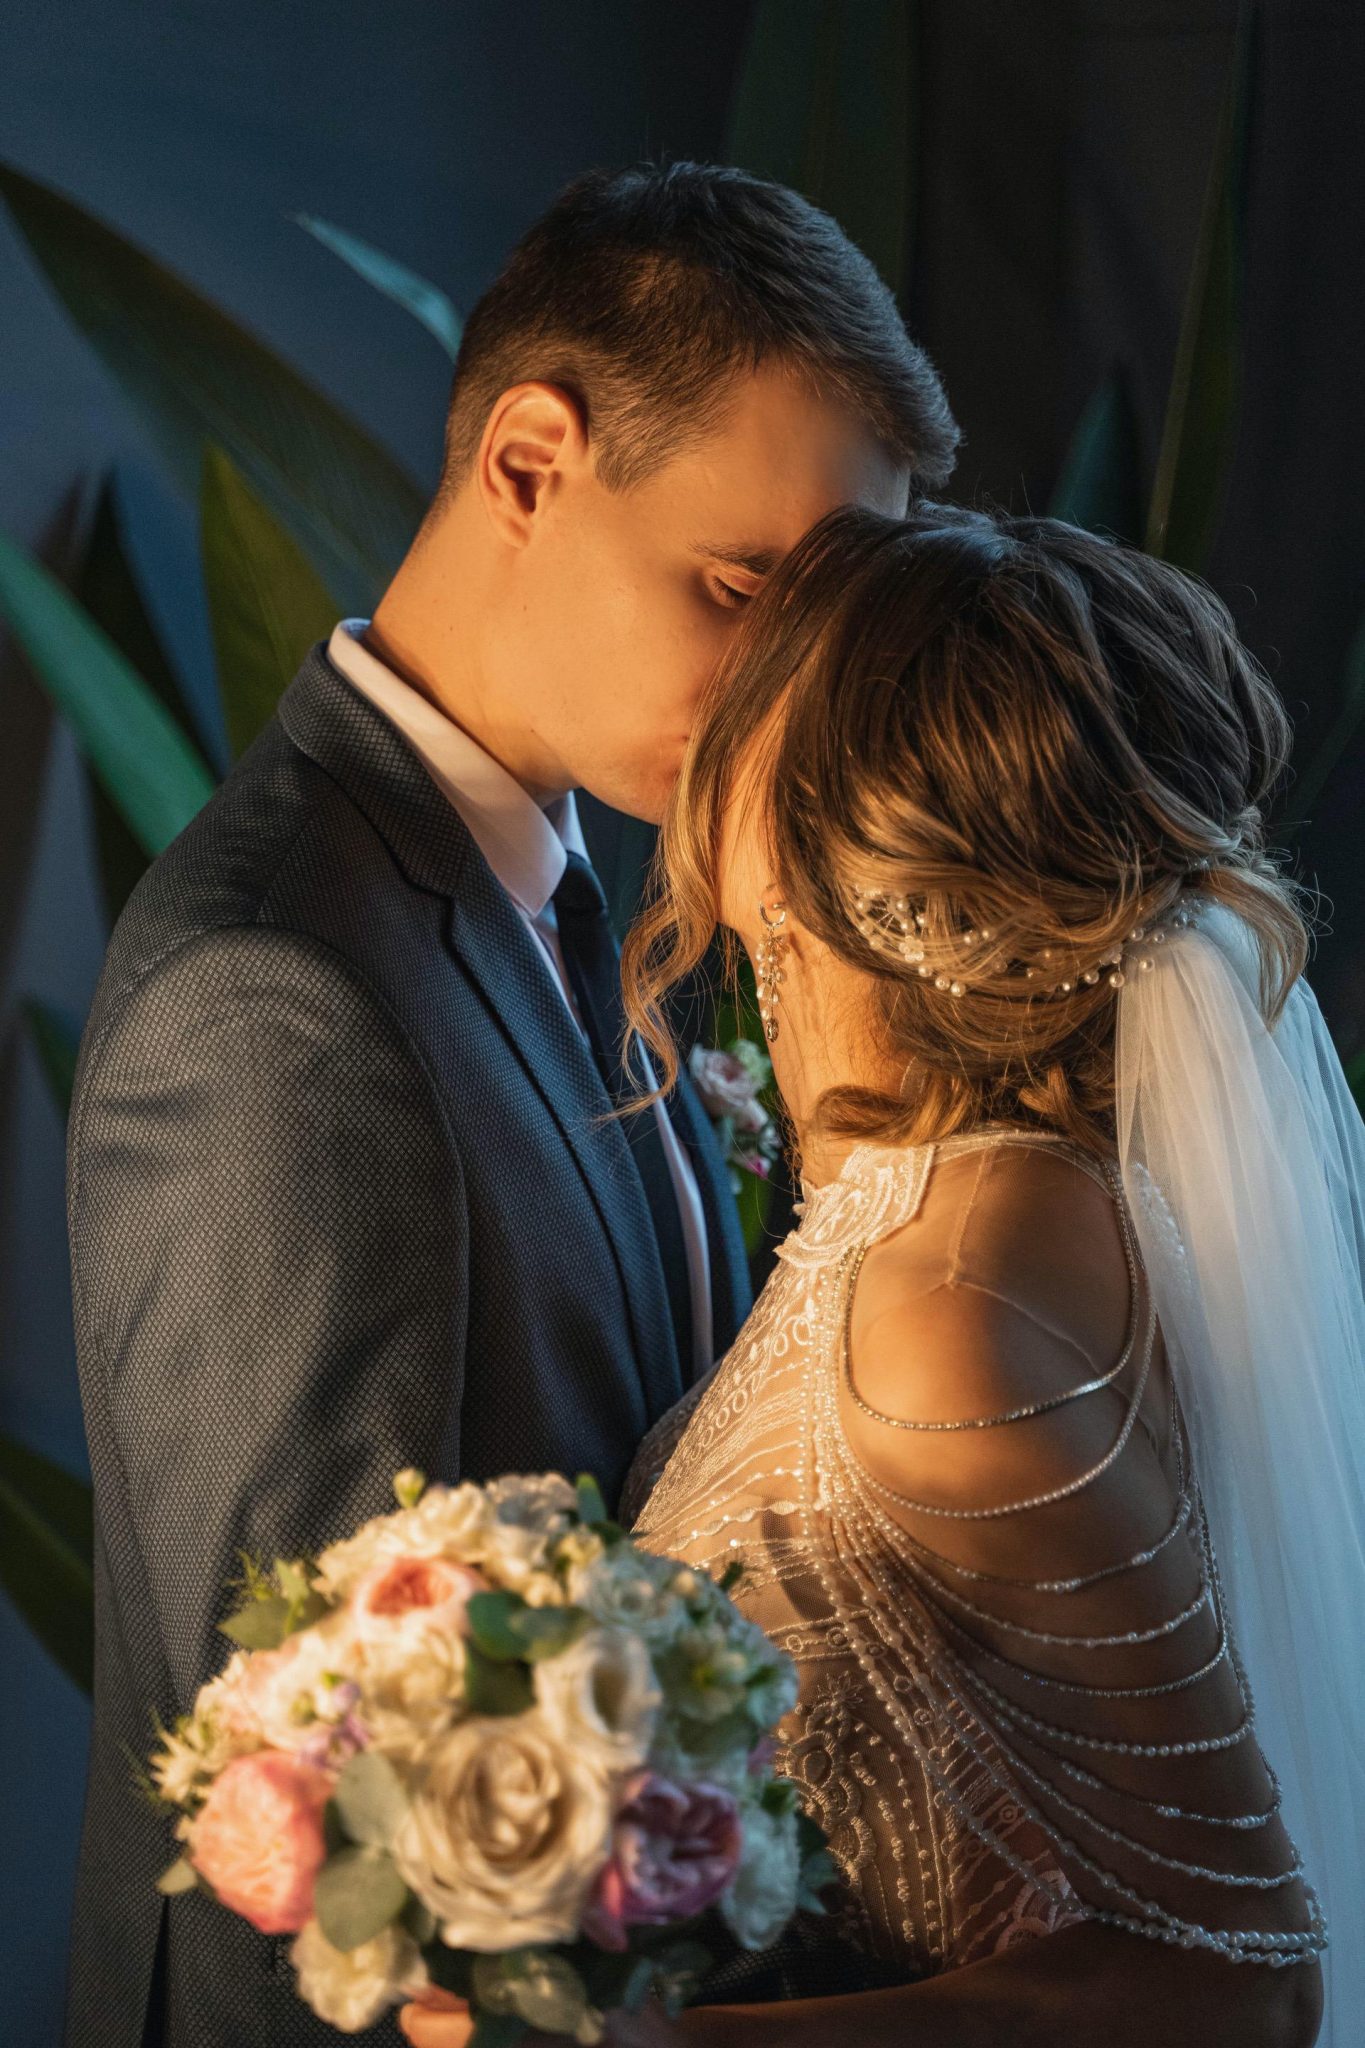 Bride in customized wedding dress kissing groom during ceremony